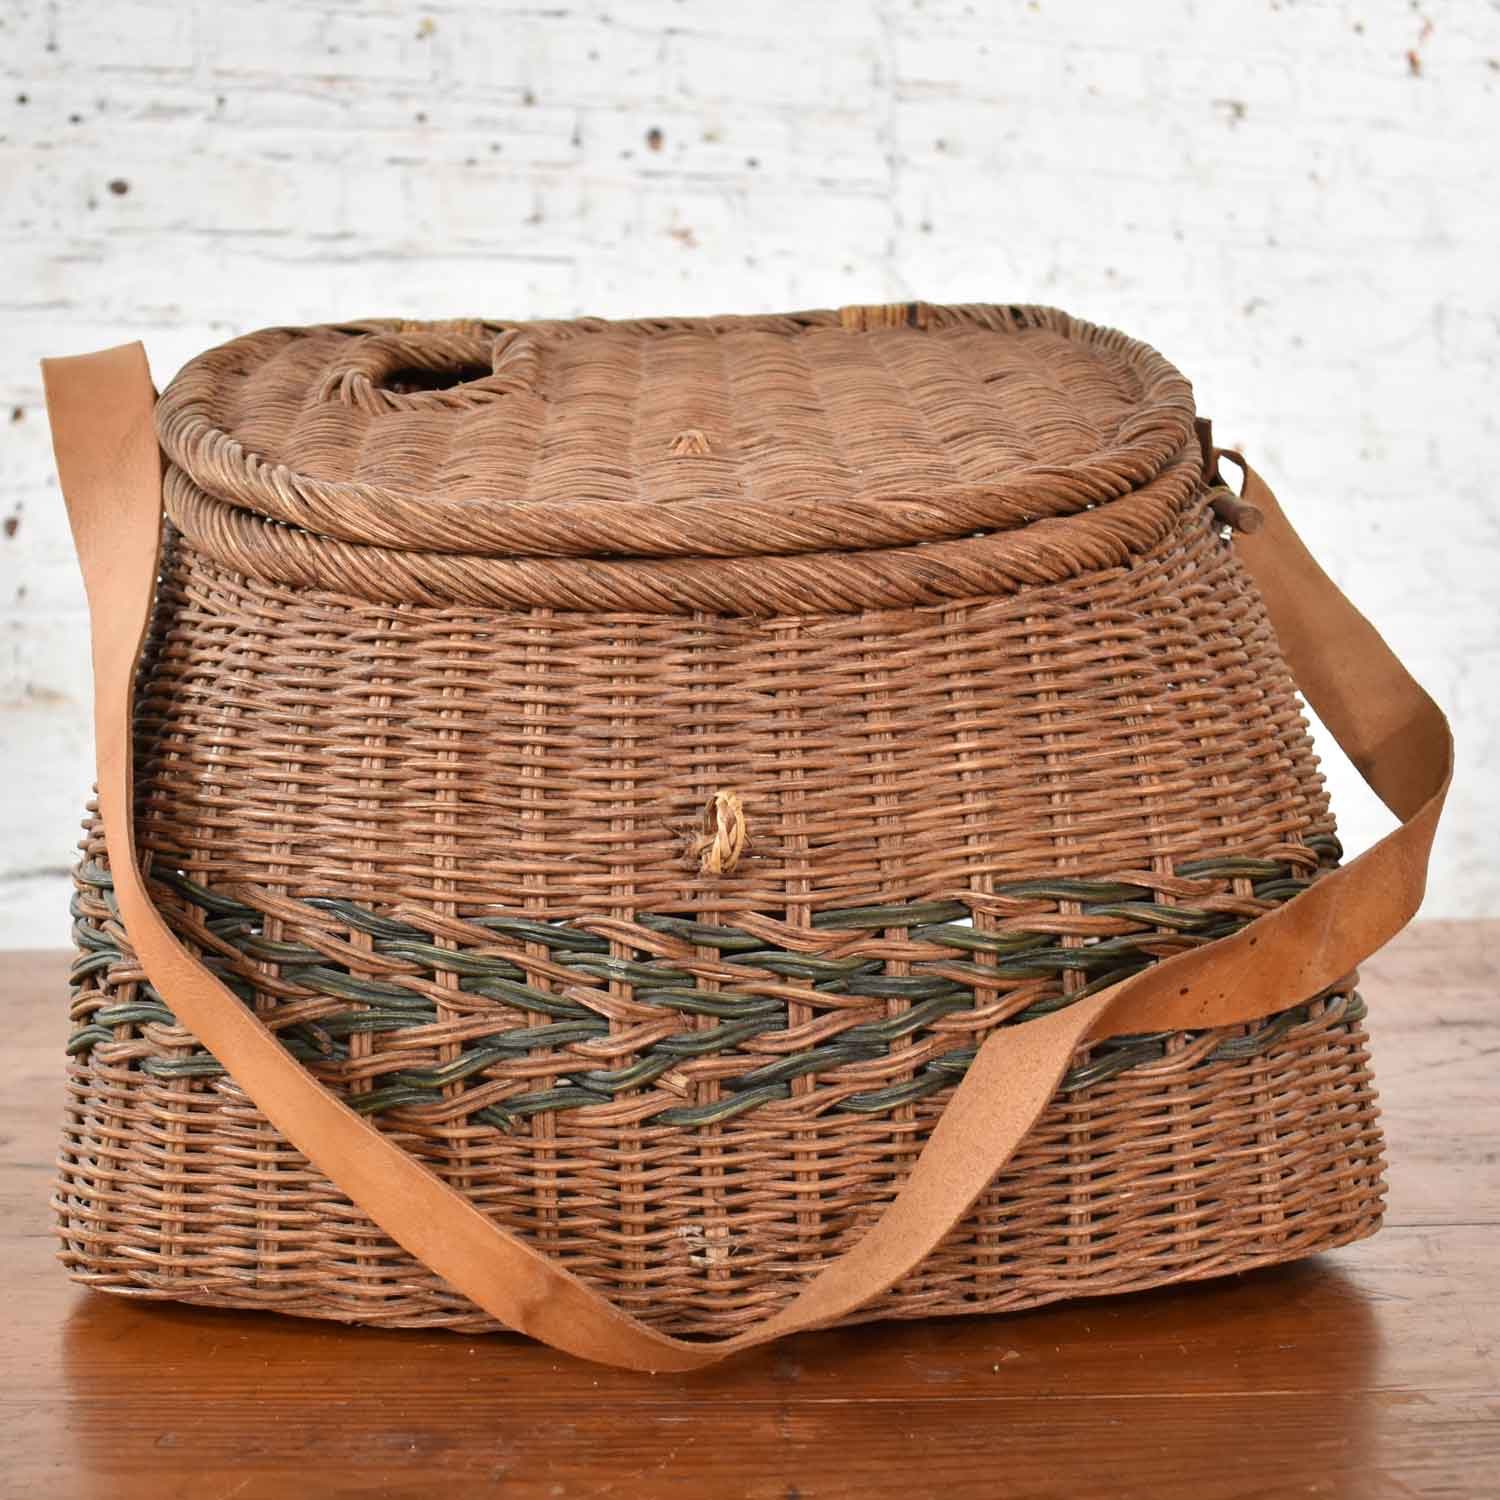 Antique Wicker Basket Fishing Creel with Leather Strap Handle